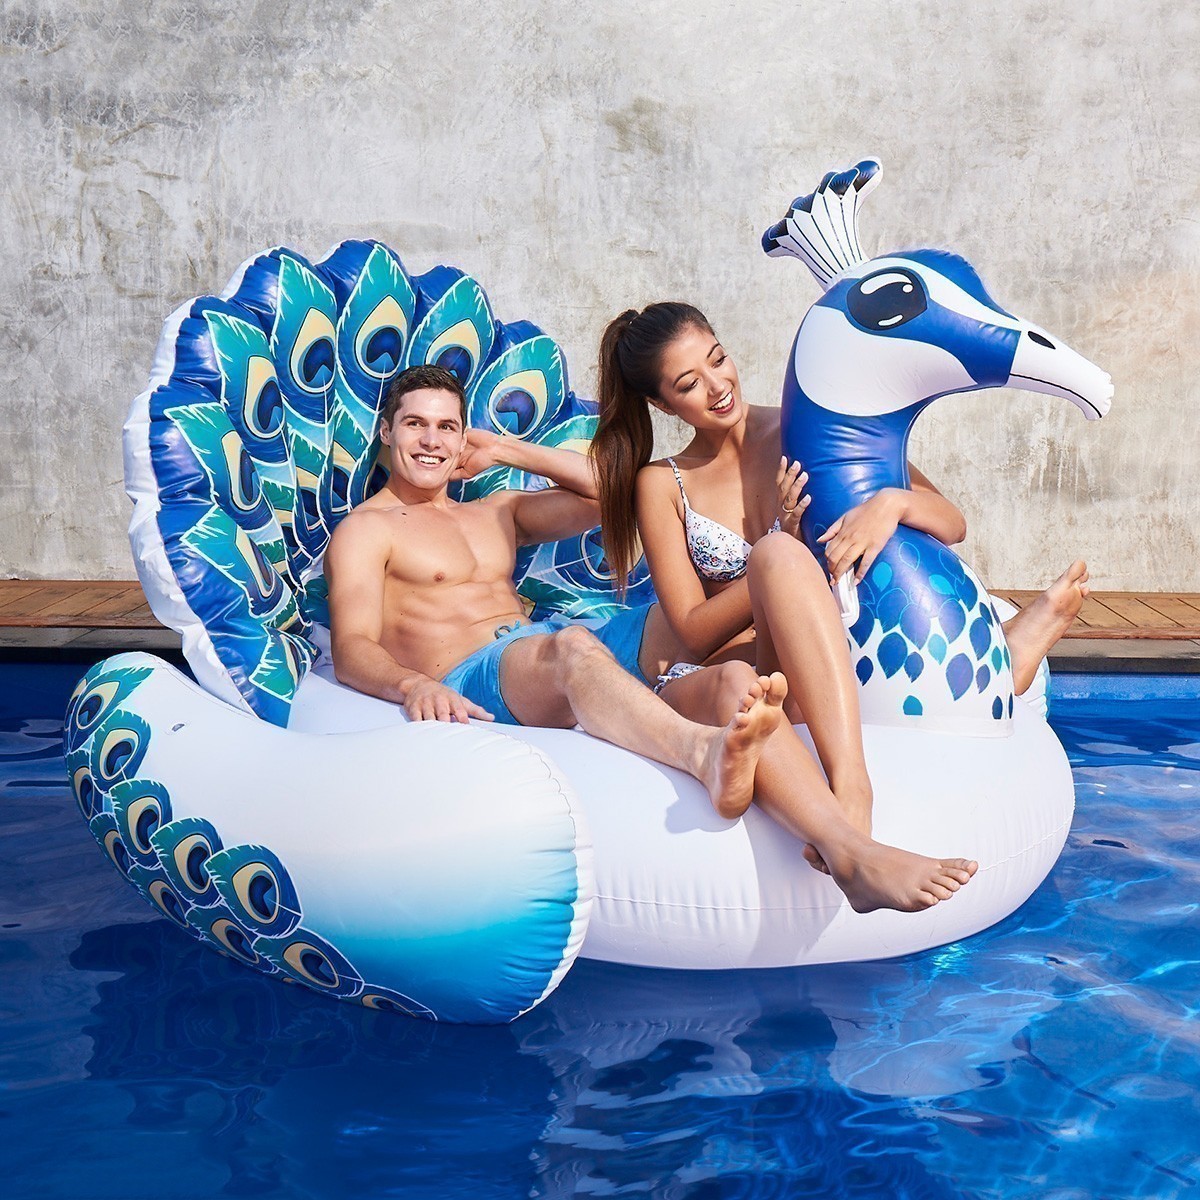 Air Time Luxe - Giant Peacock Lounger